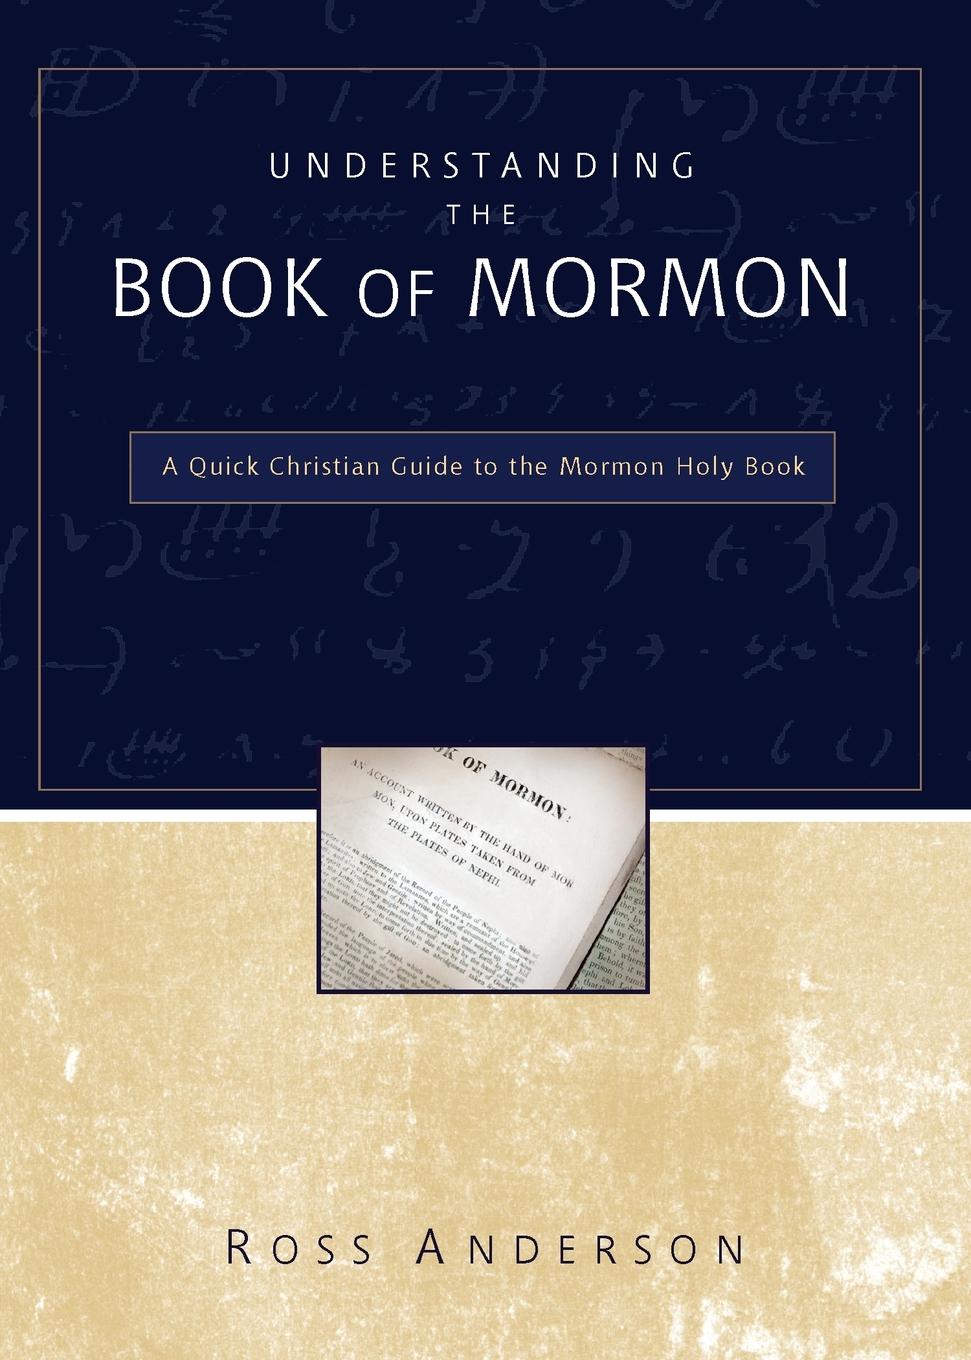 Understanding the Book of Mormon. A Quick Christian Guide to the Mormon Holy Book